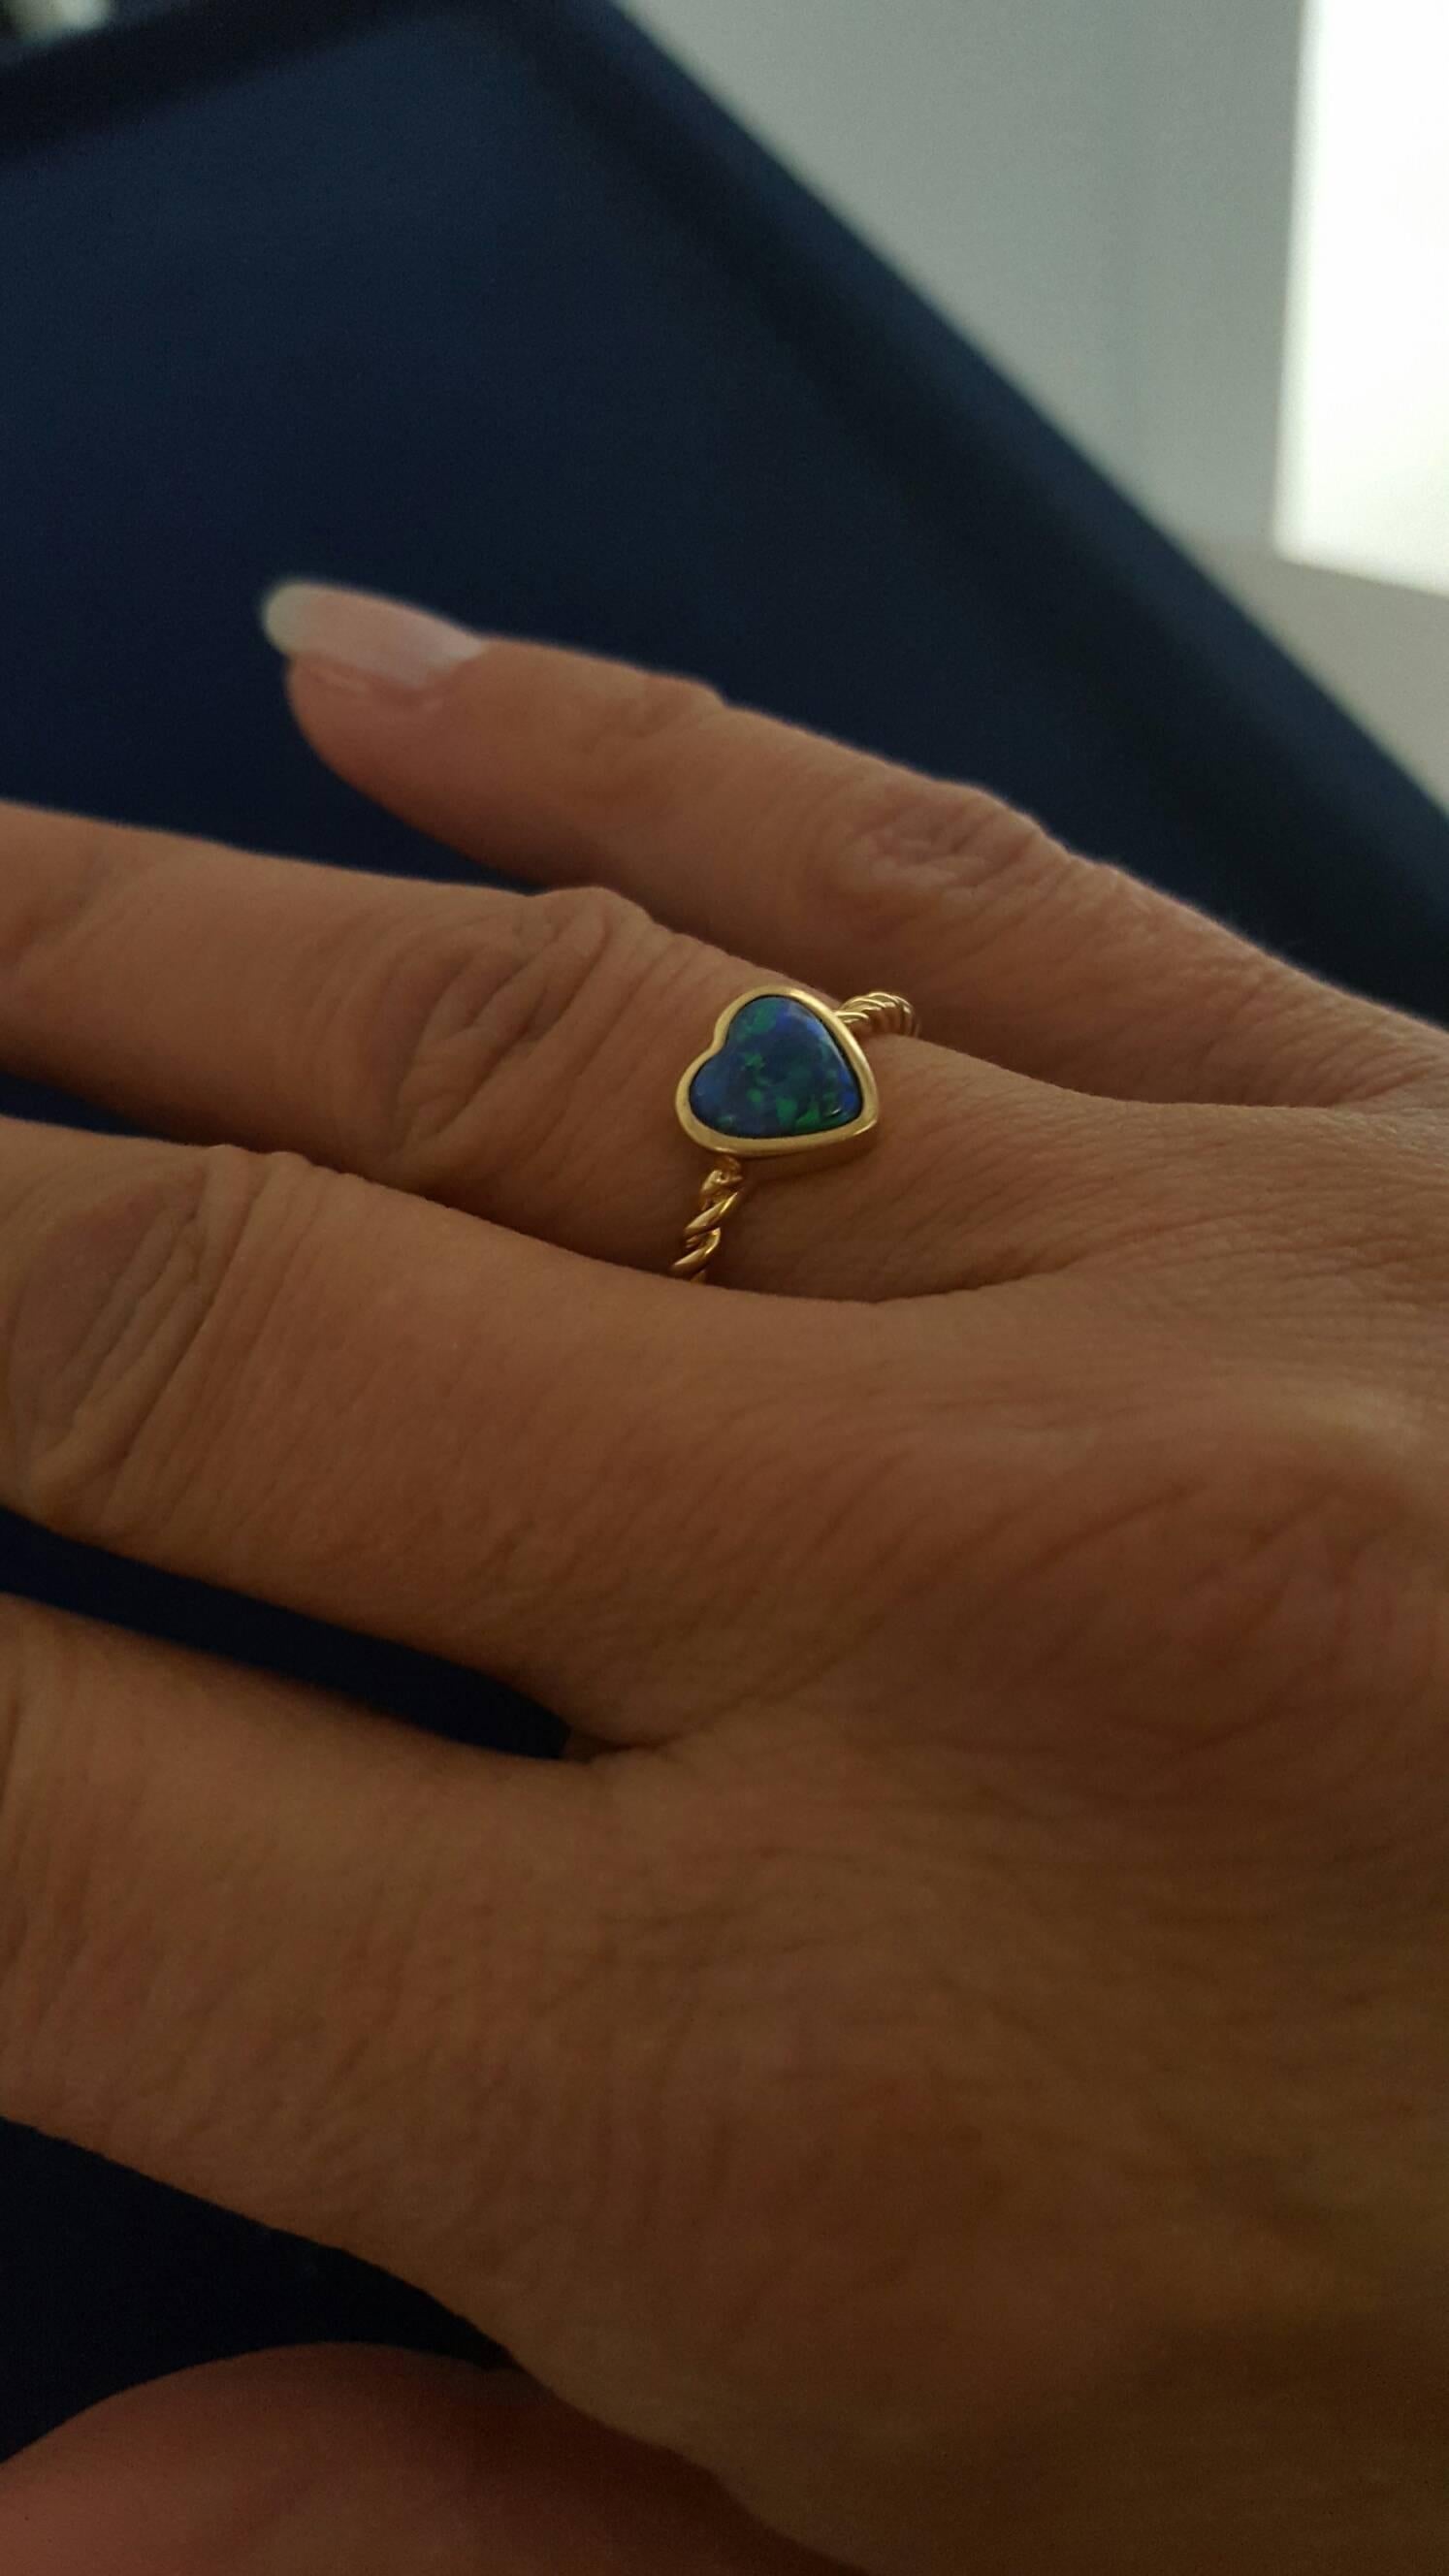 This sweet and dainty Heart Ring is perfect for everyday wear. Hand-carved 0.78ct Opal heart bezel set in 18K Yellow Gold. Ring size US 5.5.